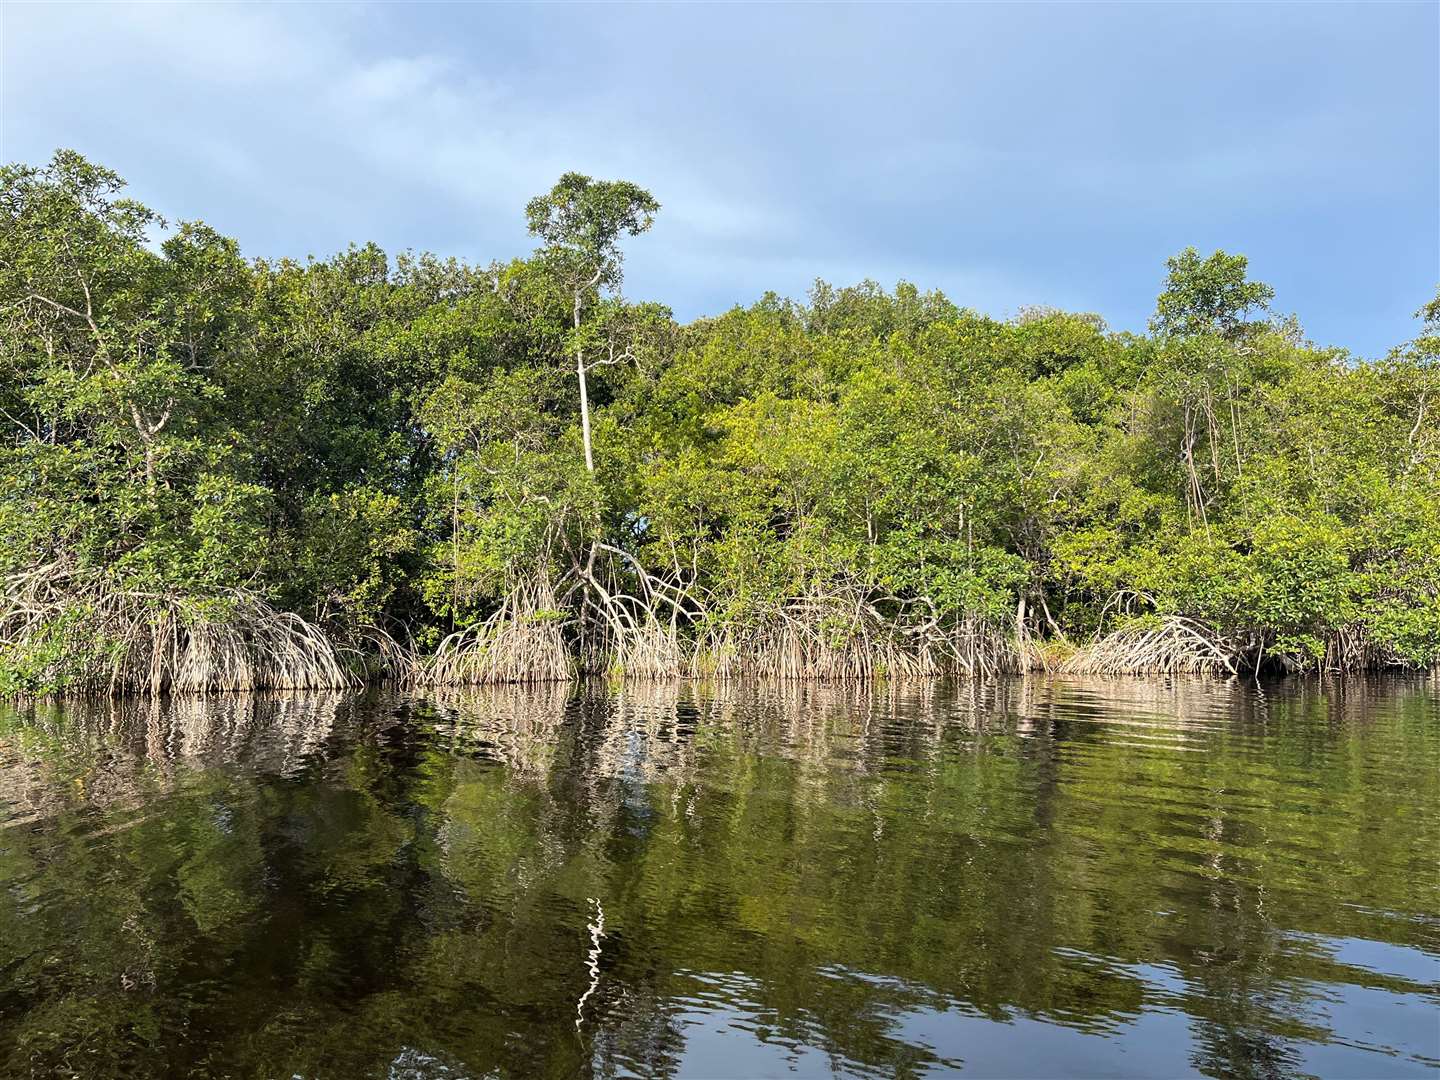 Gabon’s mangroves are also an important carbon store (Emily Beament/PA)